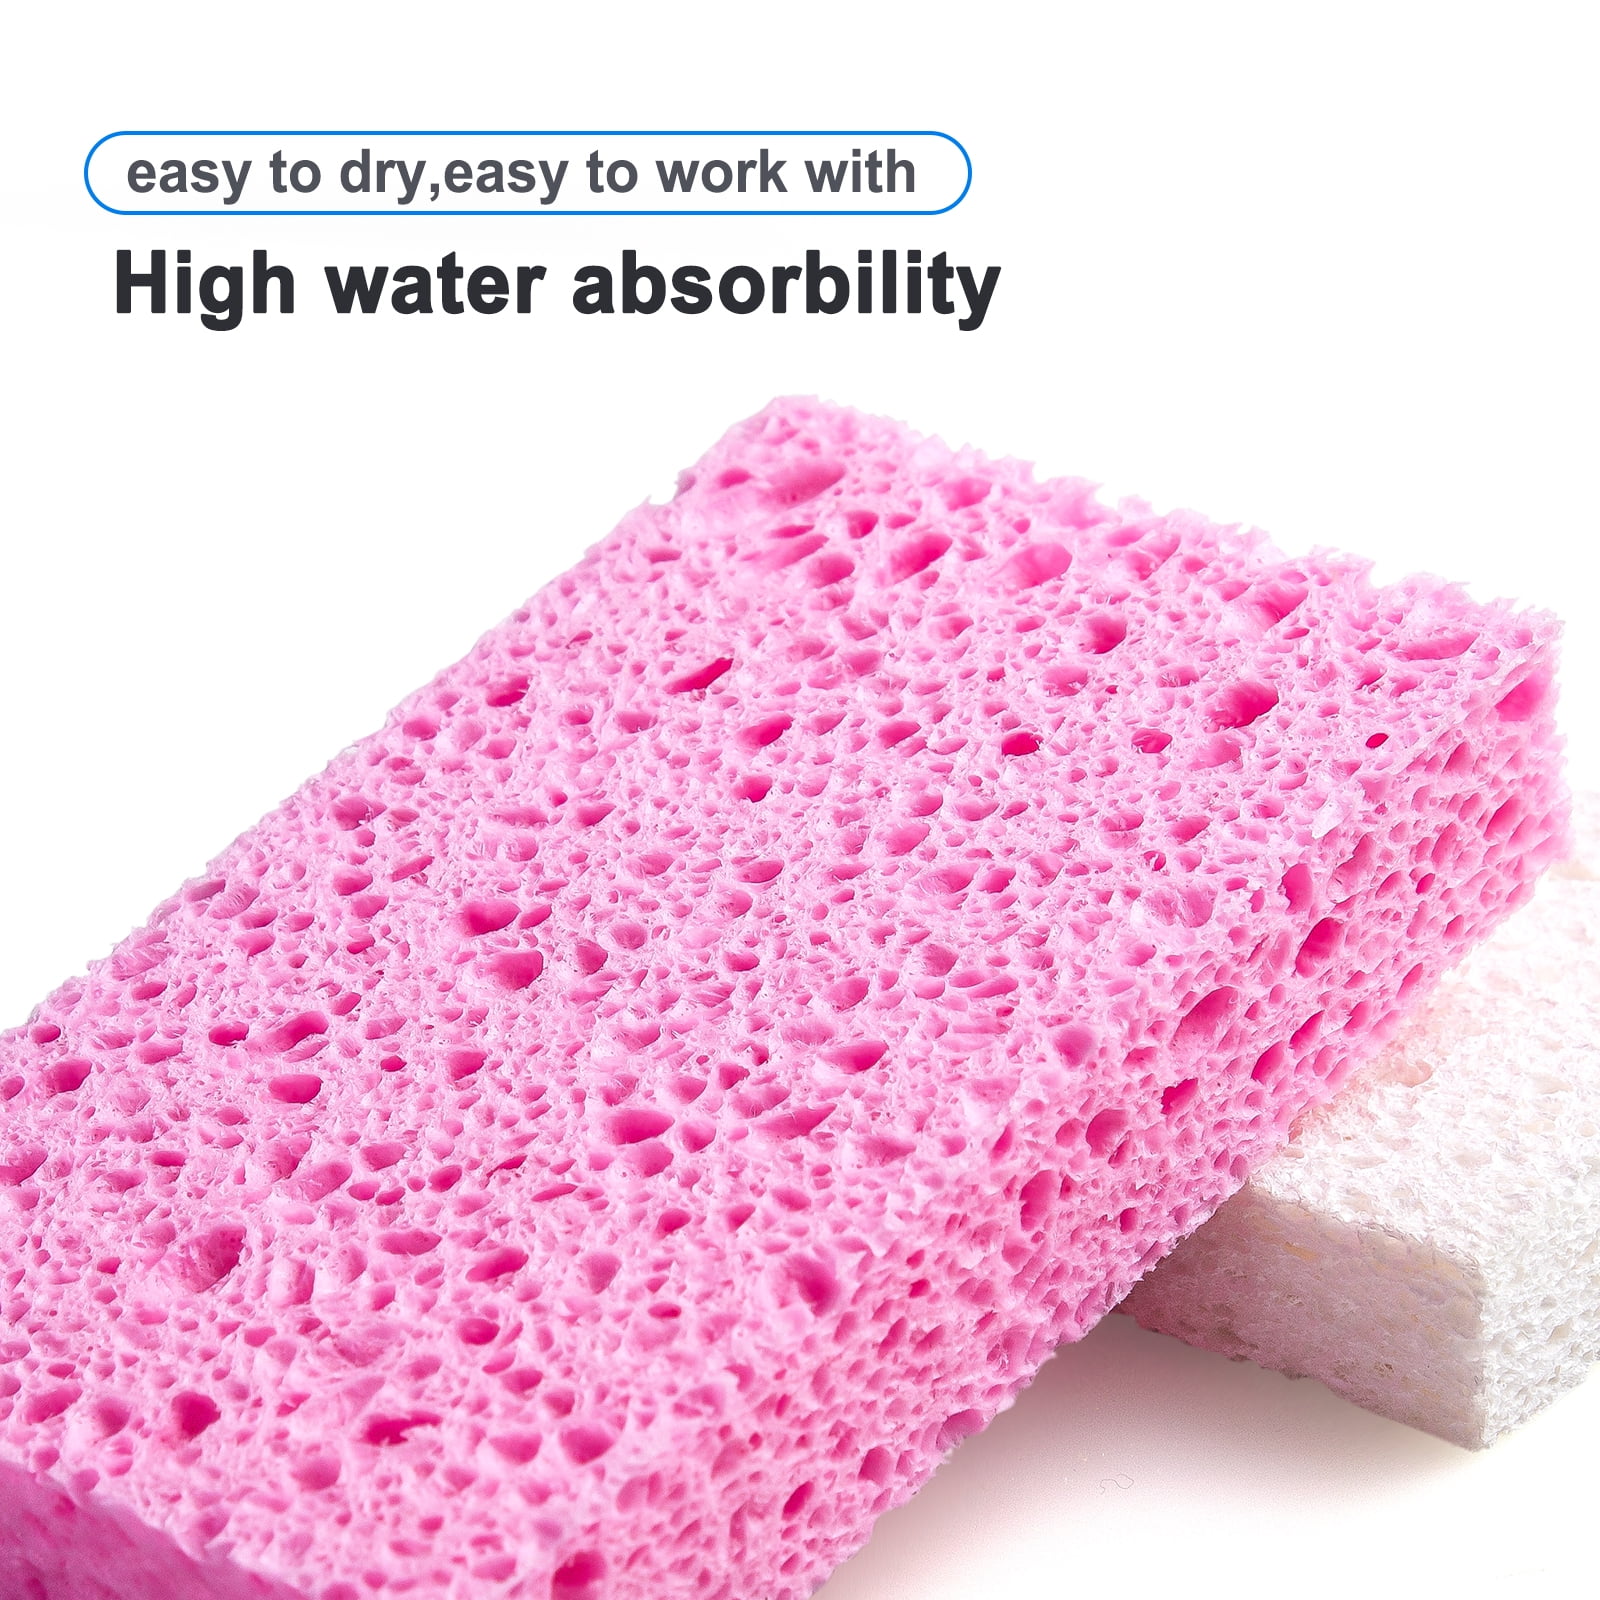 JOYMOOP Compressed Sponges, Cellulose Sponges Kitchen for Non-Scratch  Washing Dishes, Household Cleaning Scrub Natural Sponges, Pack of 12  Colorful